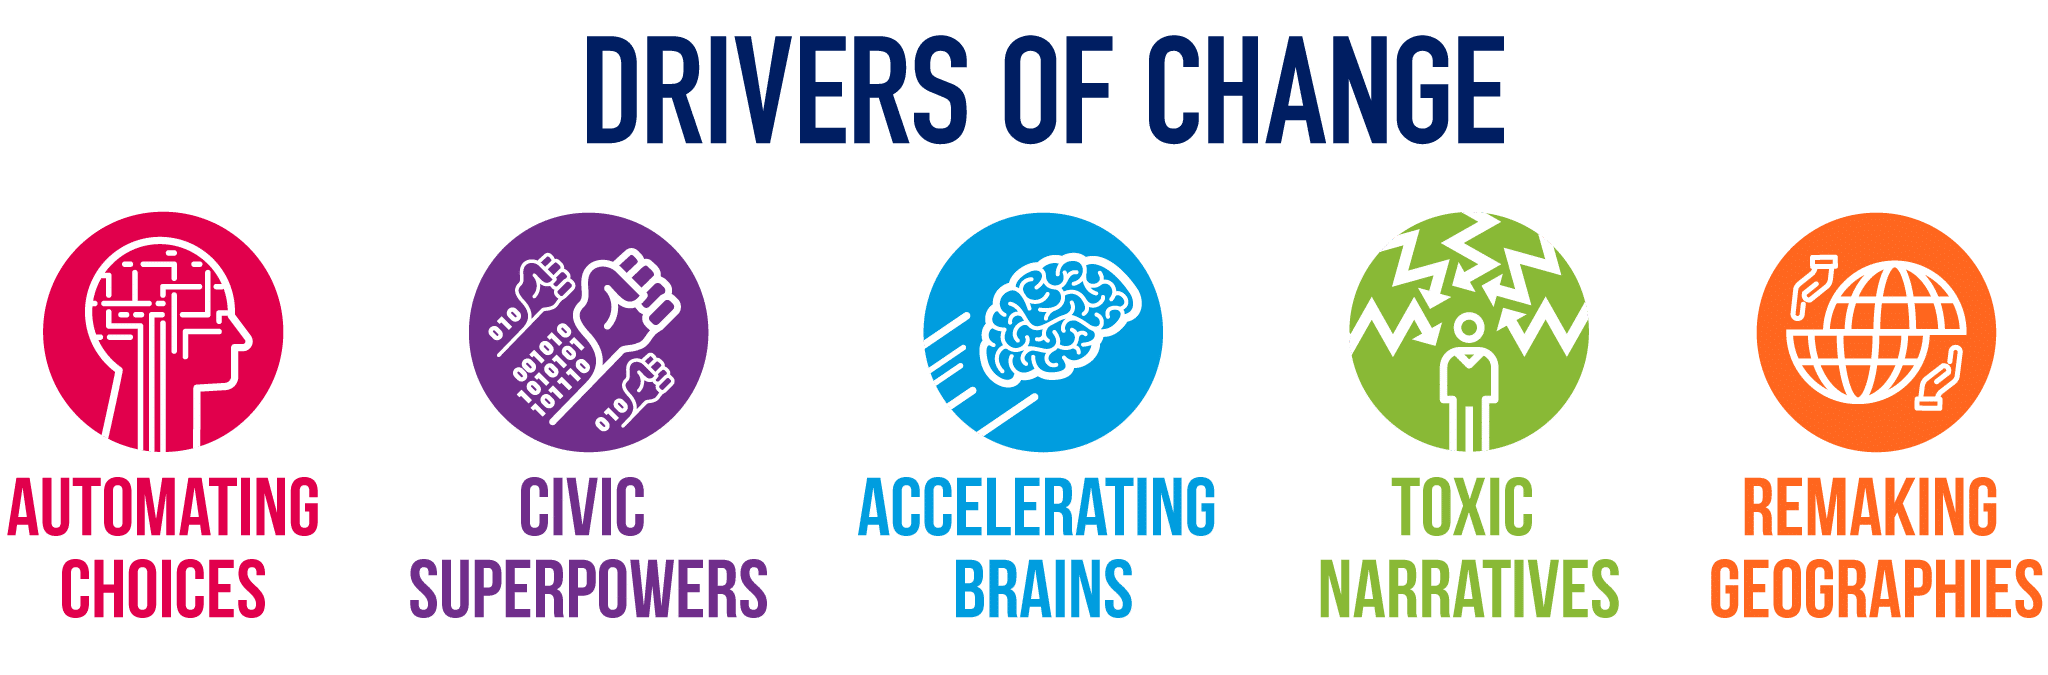 5 Drivers of Change: automating choices, civic superpowers, accelerating brains, toxic narratives, remaking geographies